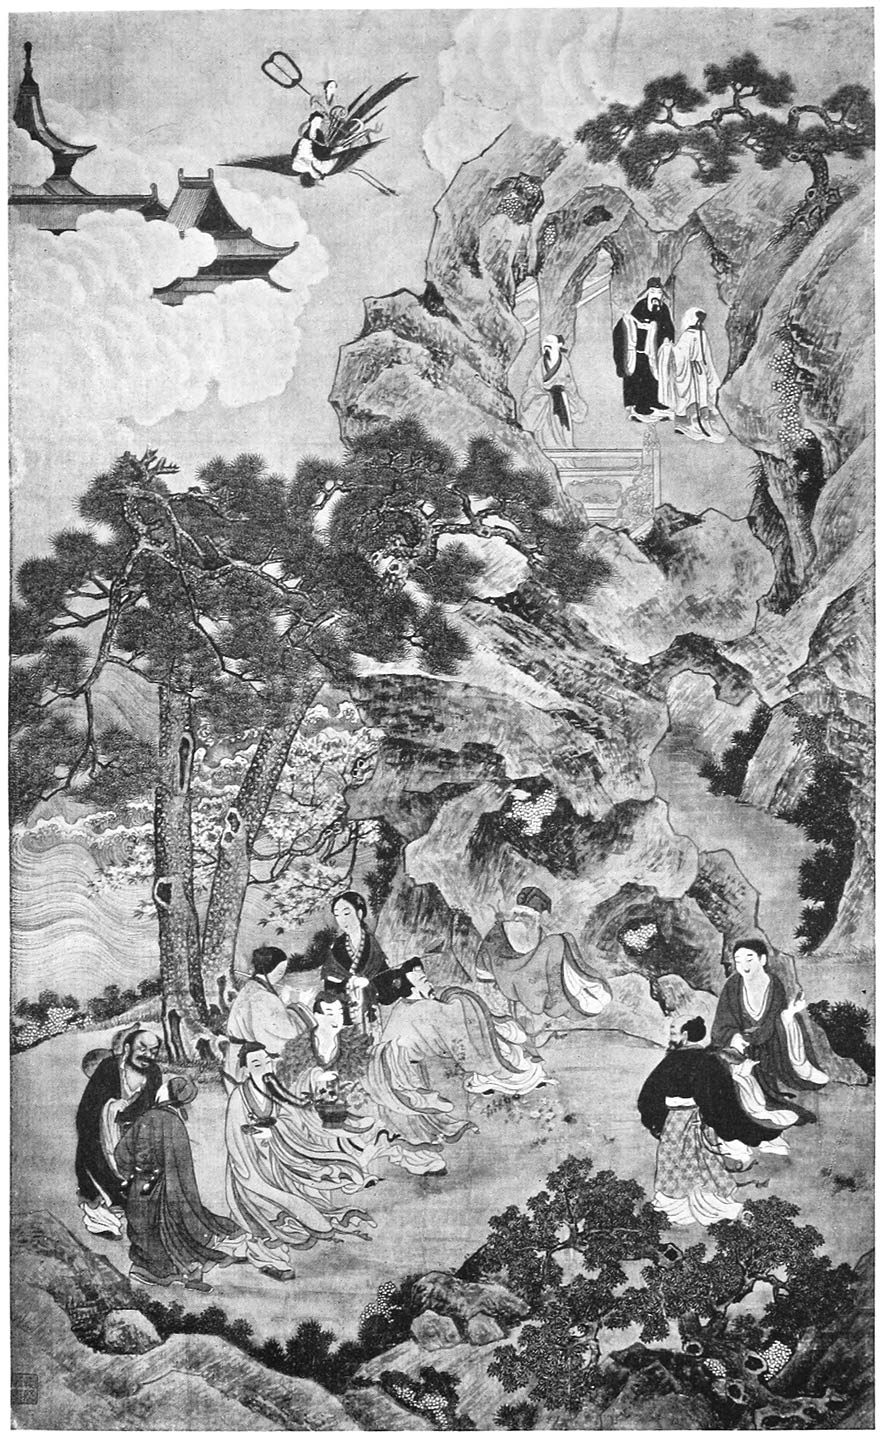 GENII AT THE COURT OF SI WANG MU